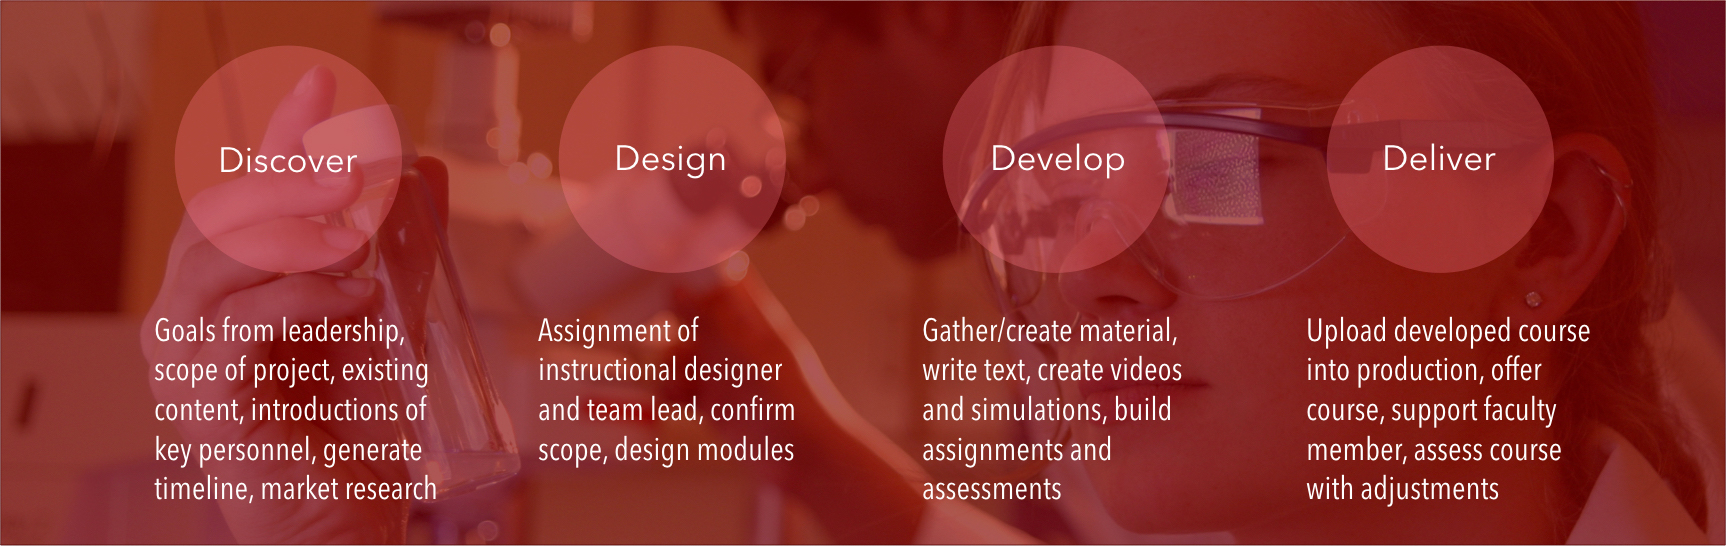 1. Discover - Goals from leadership, scope of project, existing content, introductions of key personnel, generate timeline, market research. 2. Design - Assignment of instructional designer and team lead, confirm scope, design modules. 3. Develop - Gather/create material, write text, create videos and simulations, build assignments, and assessments. 4. Deliver - Upload developed course into production, offer course, support faculty member, assess course with adjustments